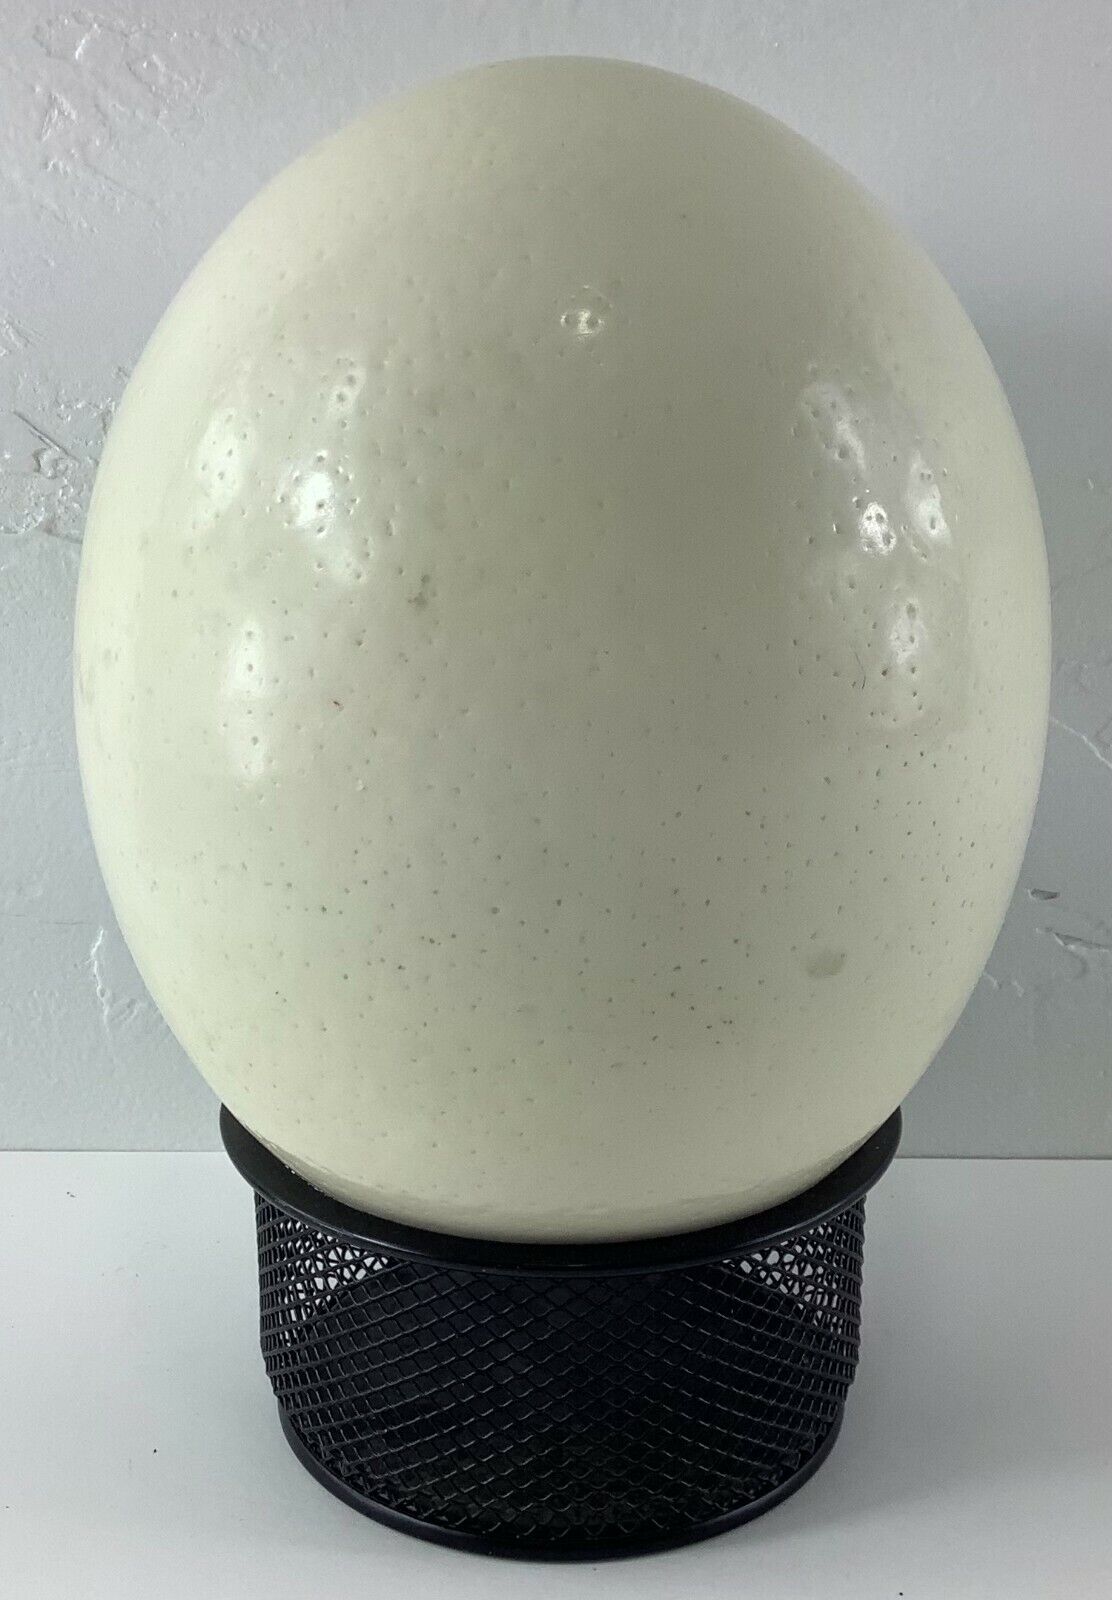 Blown Out Ostrich Egg Empty Shell 6.25" L X 5" W